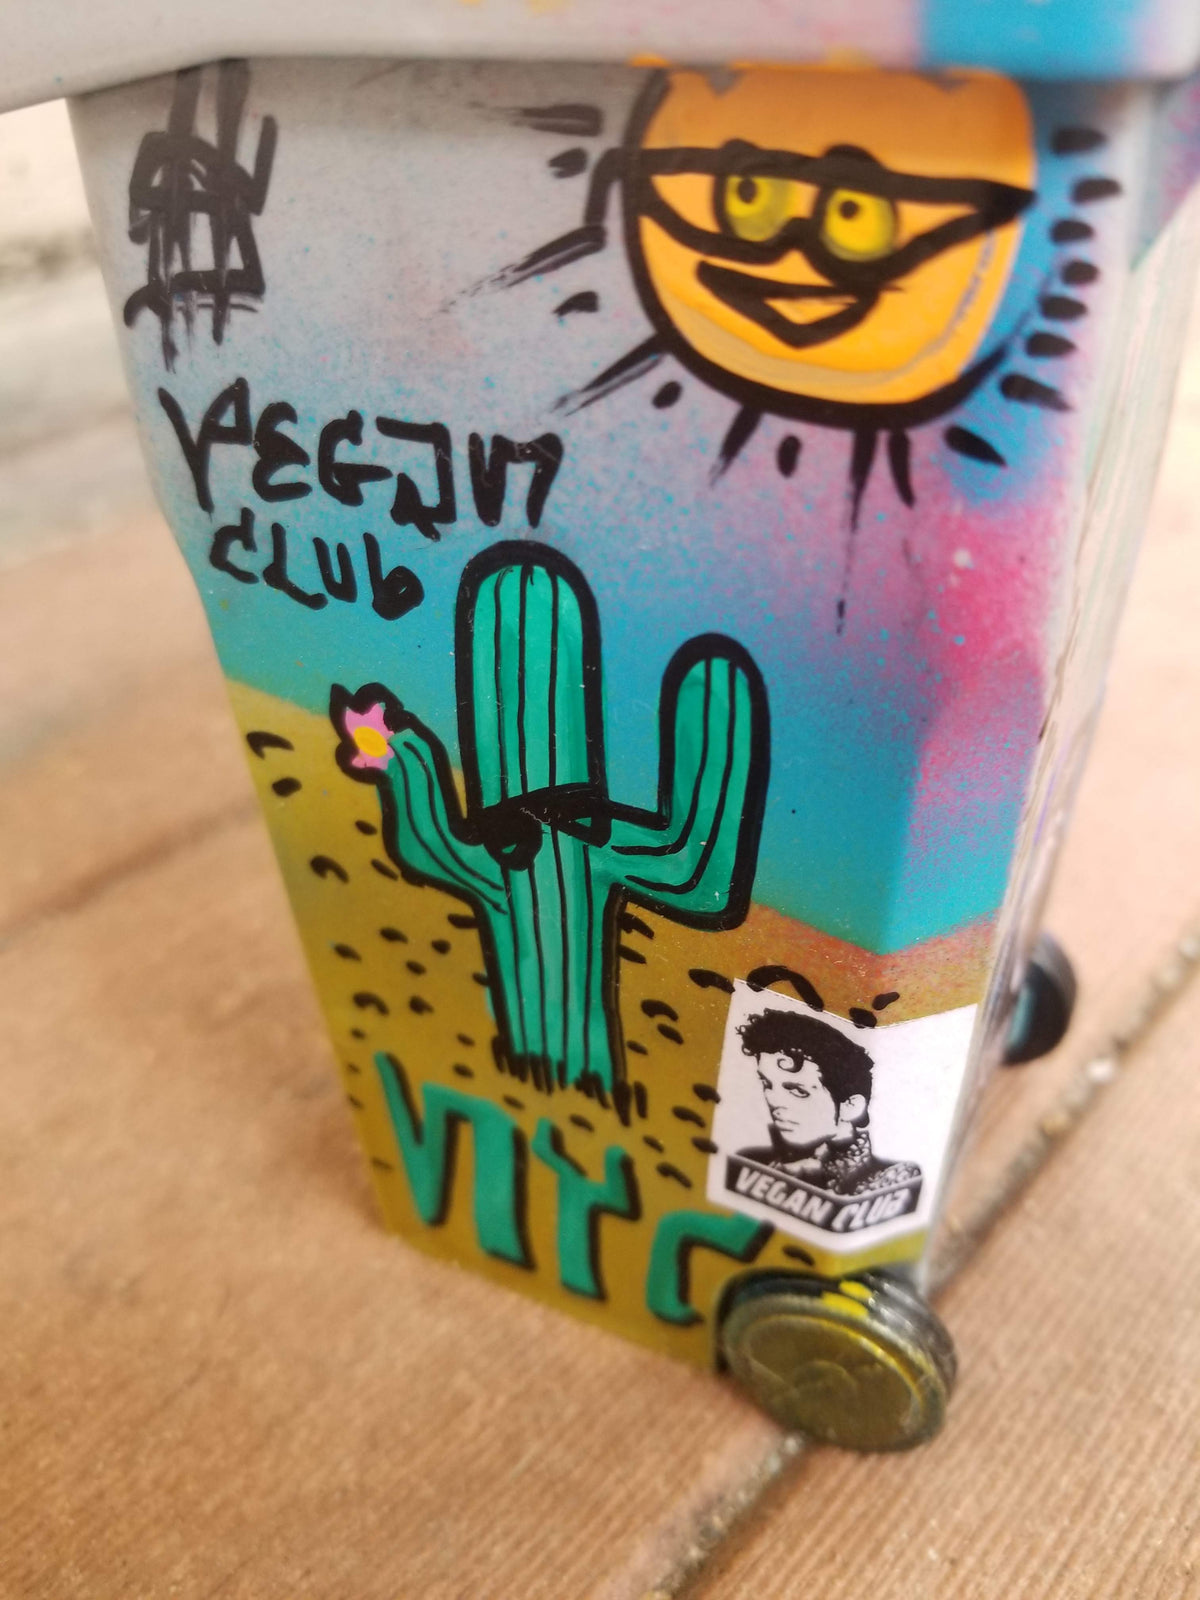 Trash Can tagged by Vegan Club, art by @_actions_not_words